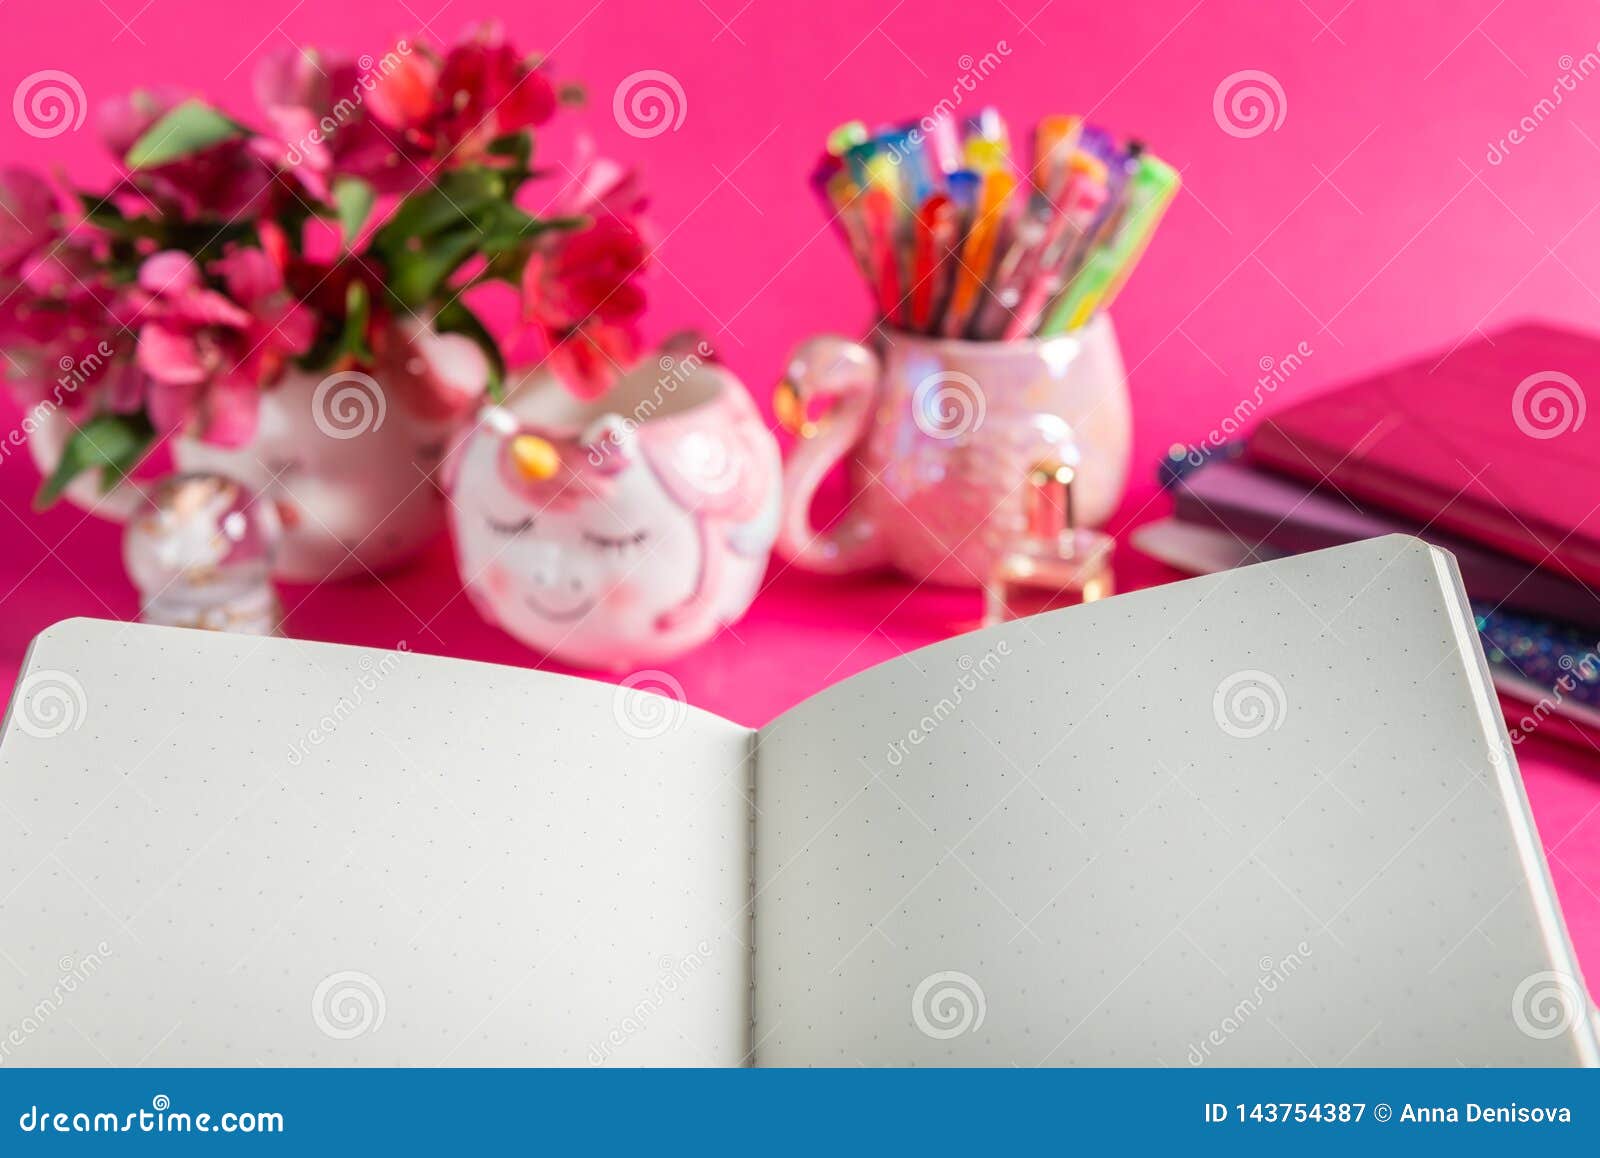 Girly Desk Table Or Office Settings Back To School Concept Stock